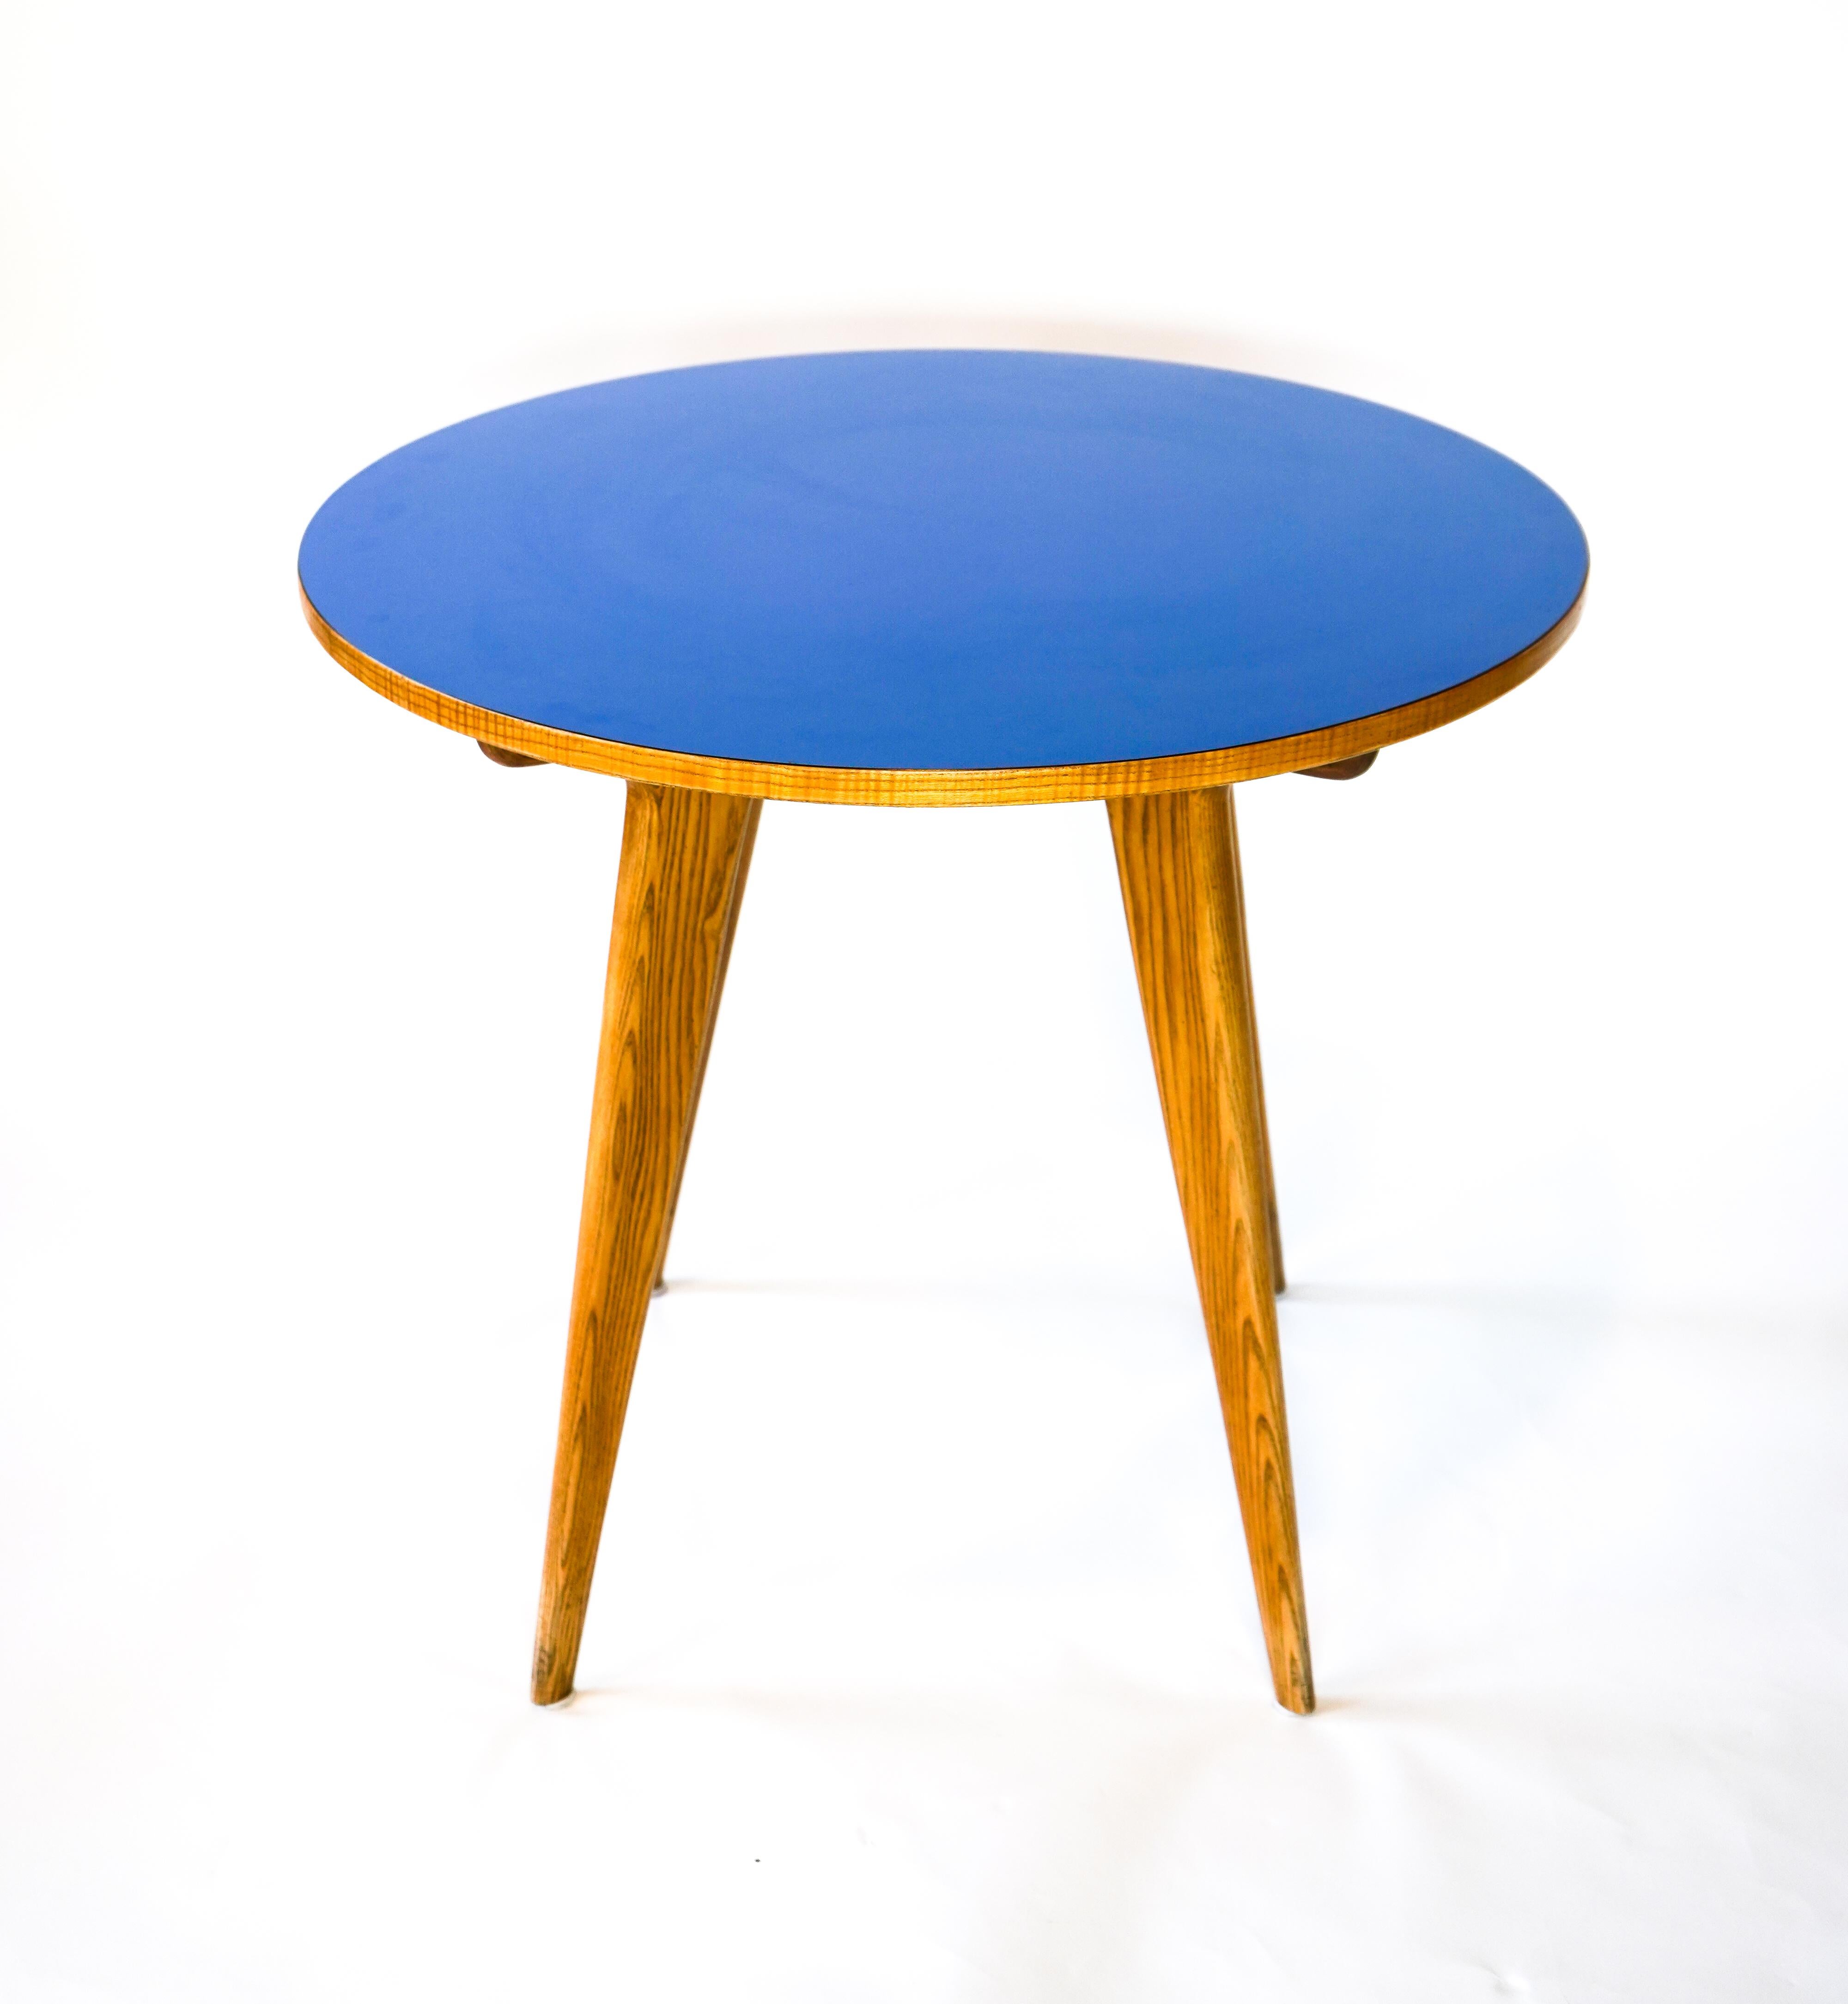 Mid-Century Modern Gio Ponti Table Designed for Parco Die Principi Hotel Sorrento Italy